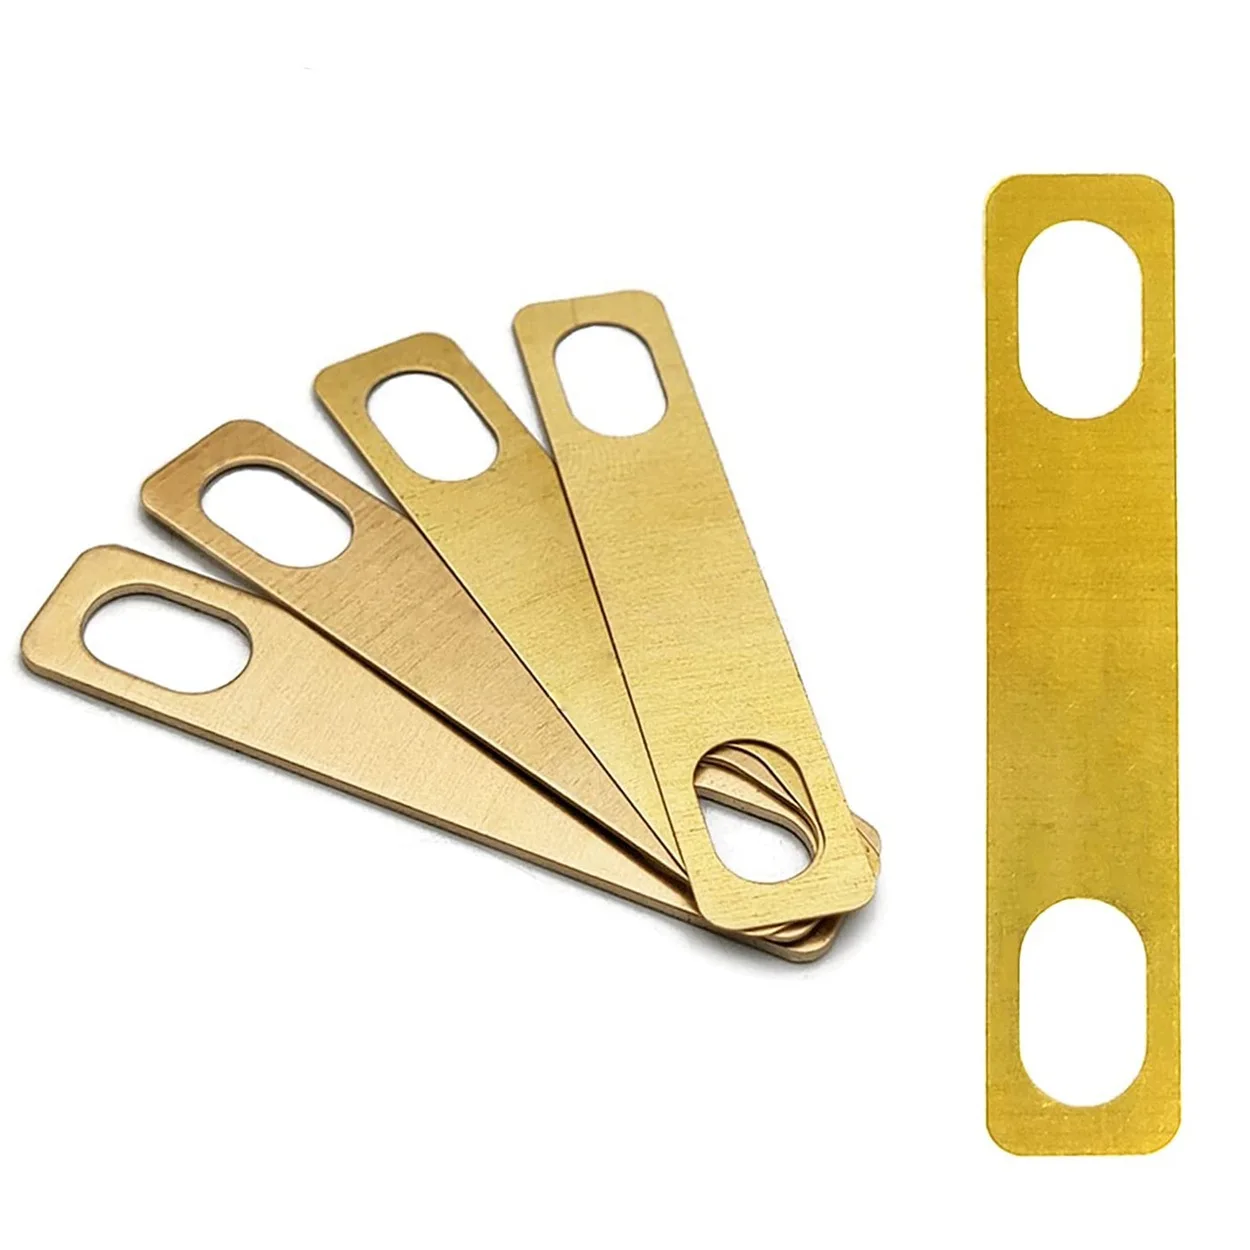 

8Pcs Guitar Neck Shims, 4Pcs 0.2mm, 2Pc 0.5mm and 2Pc 1mm Thickness Brass Shims for Electric Guitar Bass Luthier Tools